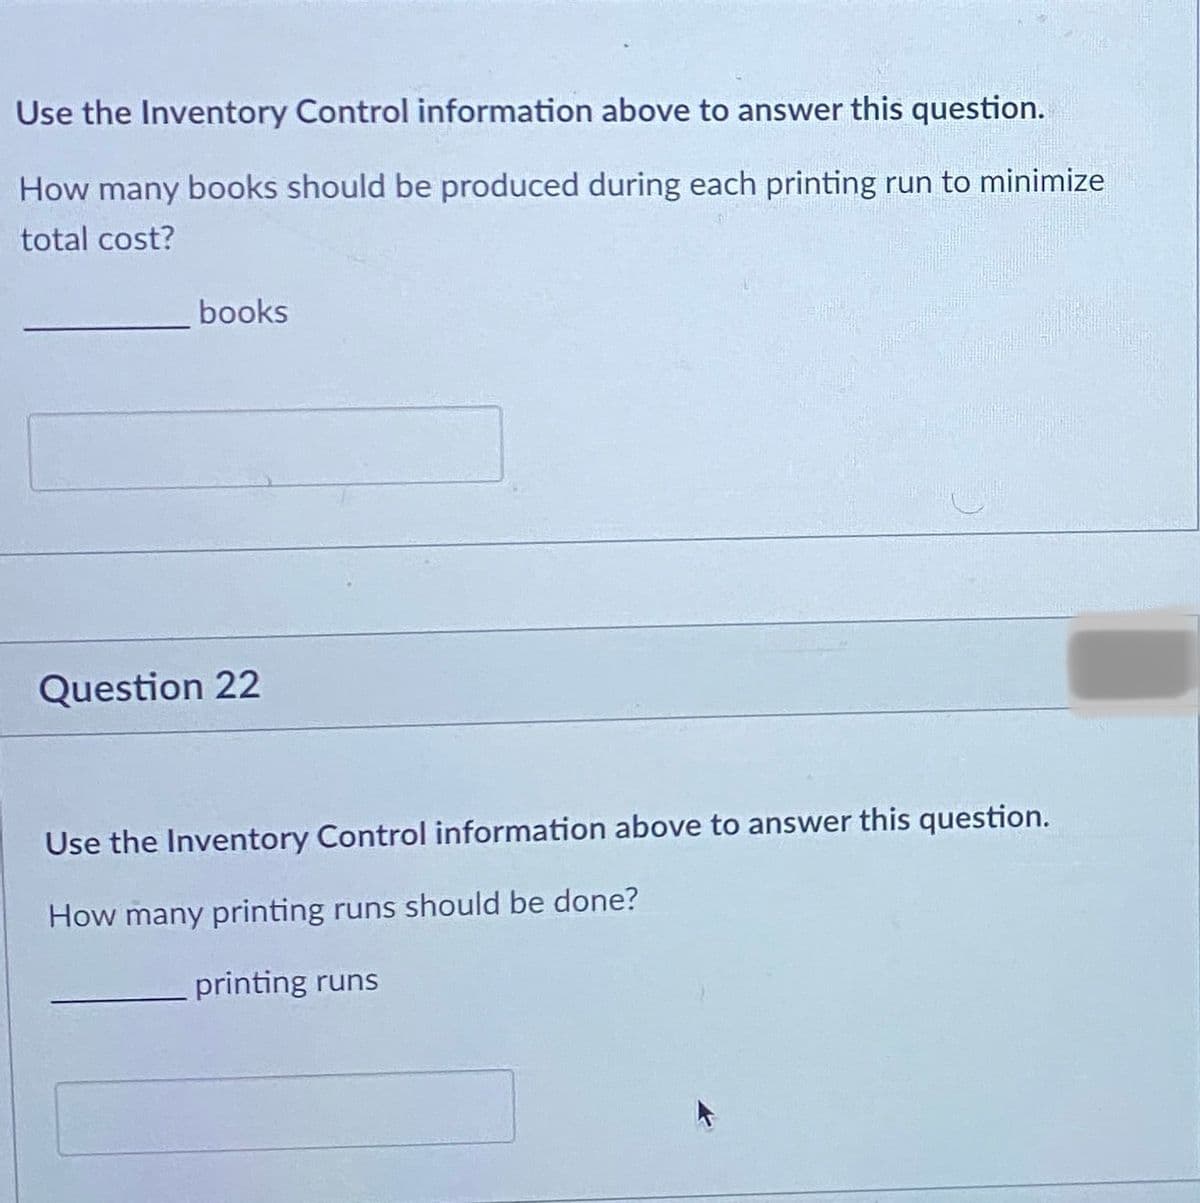 Use the Inventory Control information above to answer this question.
How many books should be produced during each printing run to minimize
total cost?
books
Question 22
Use the Inventory Control information above to answer this question.
How many printing runs should be done?
printing runs